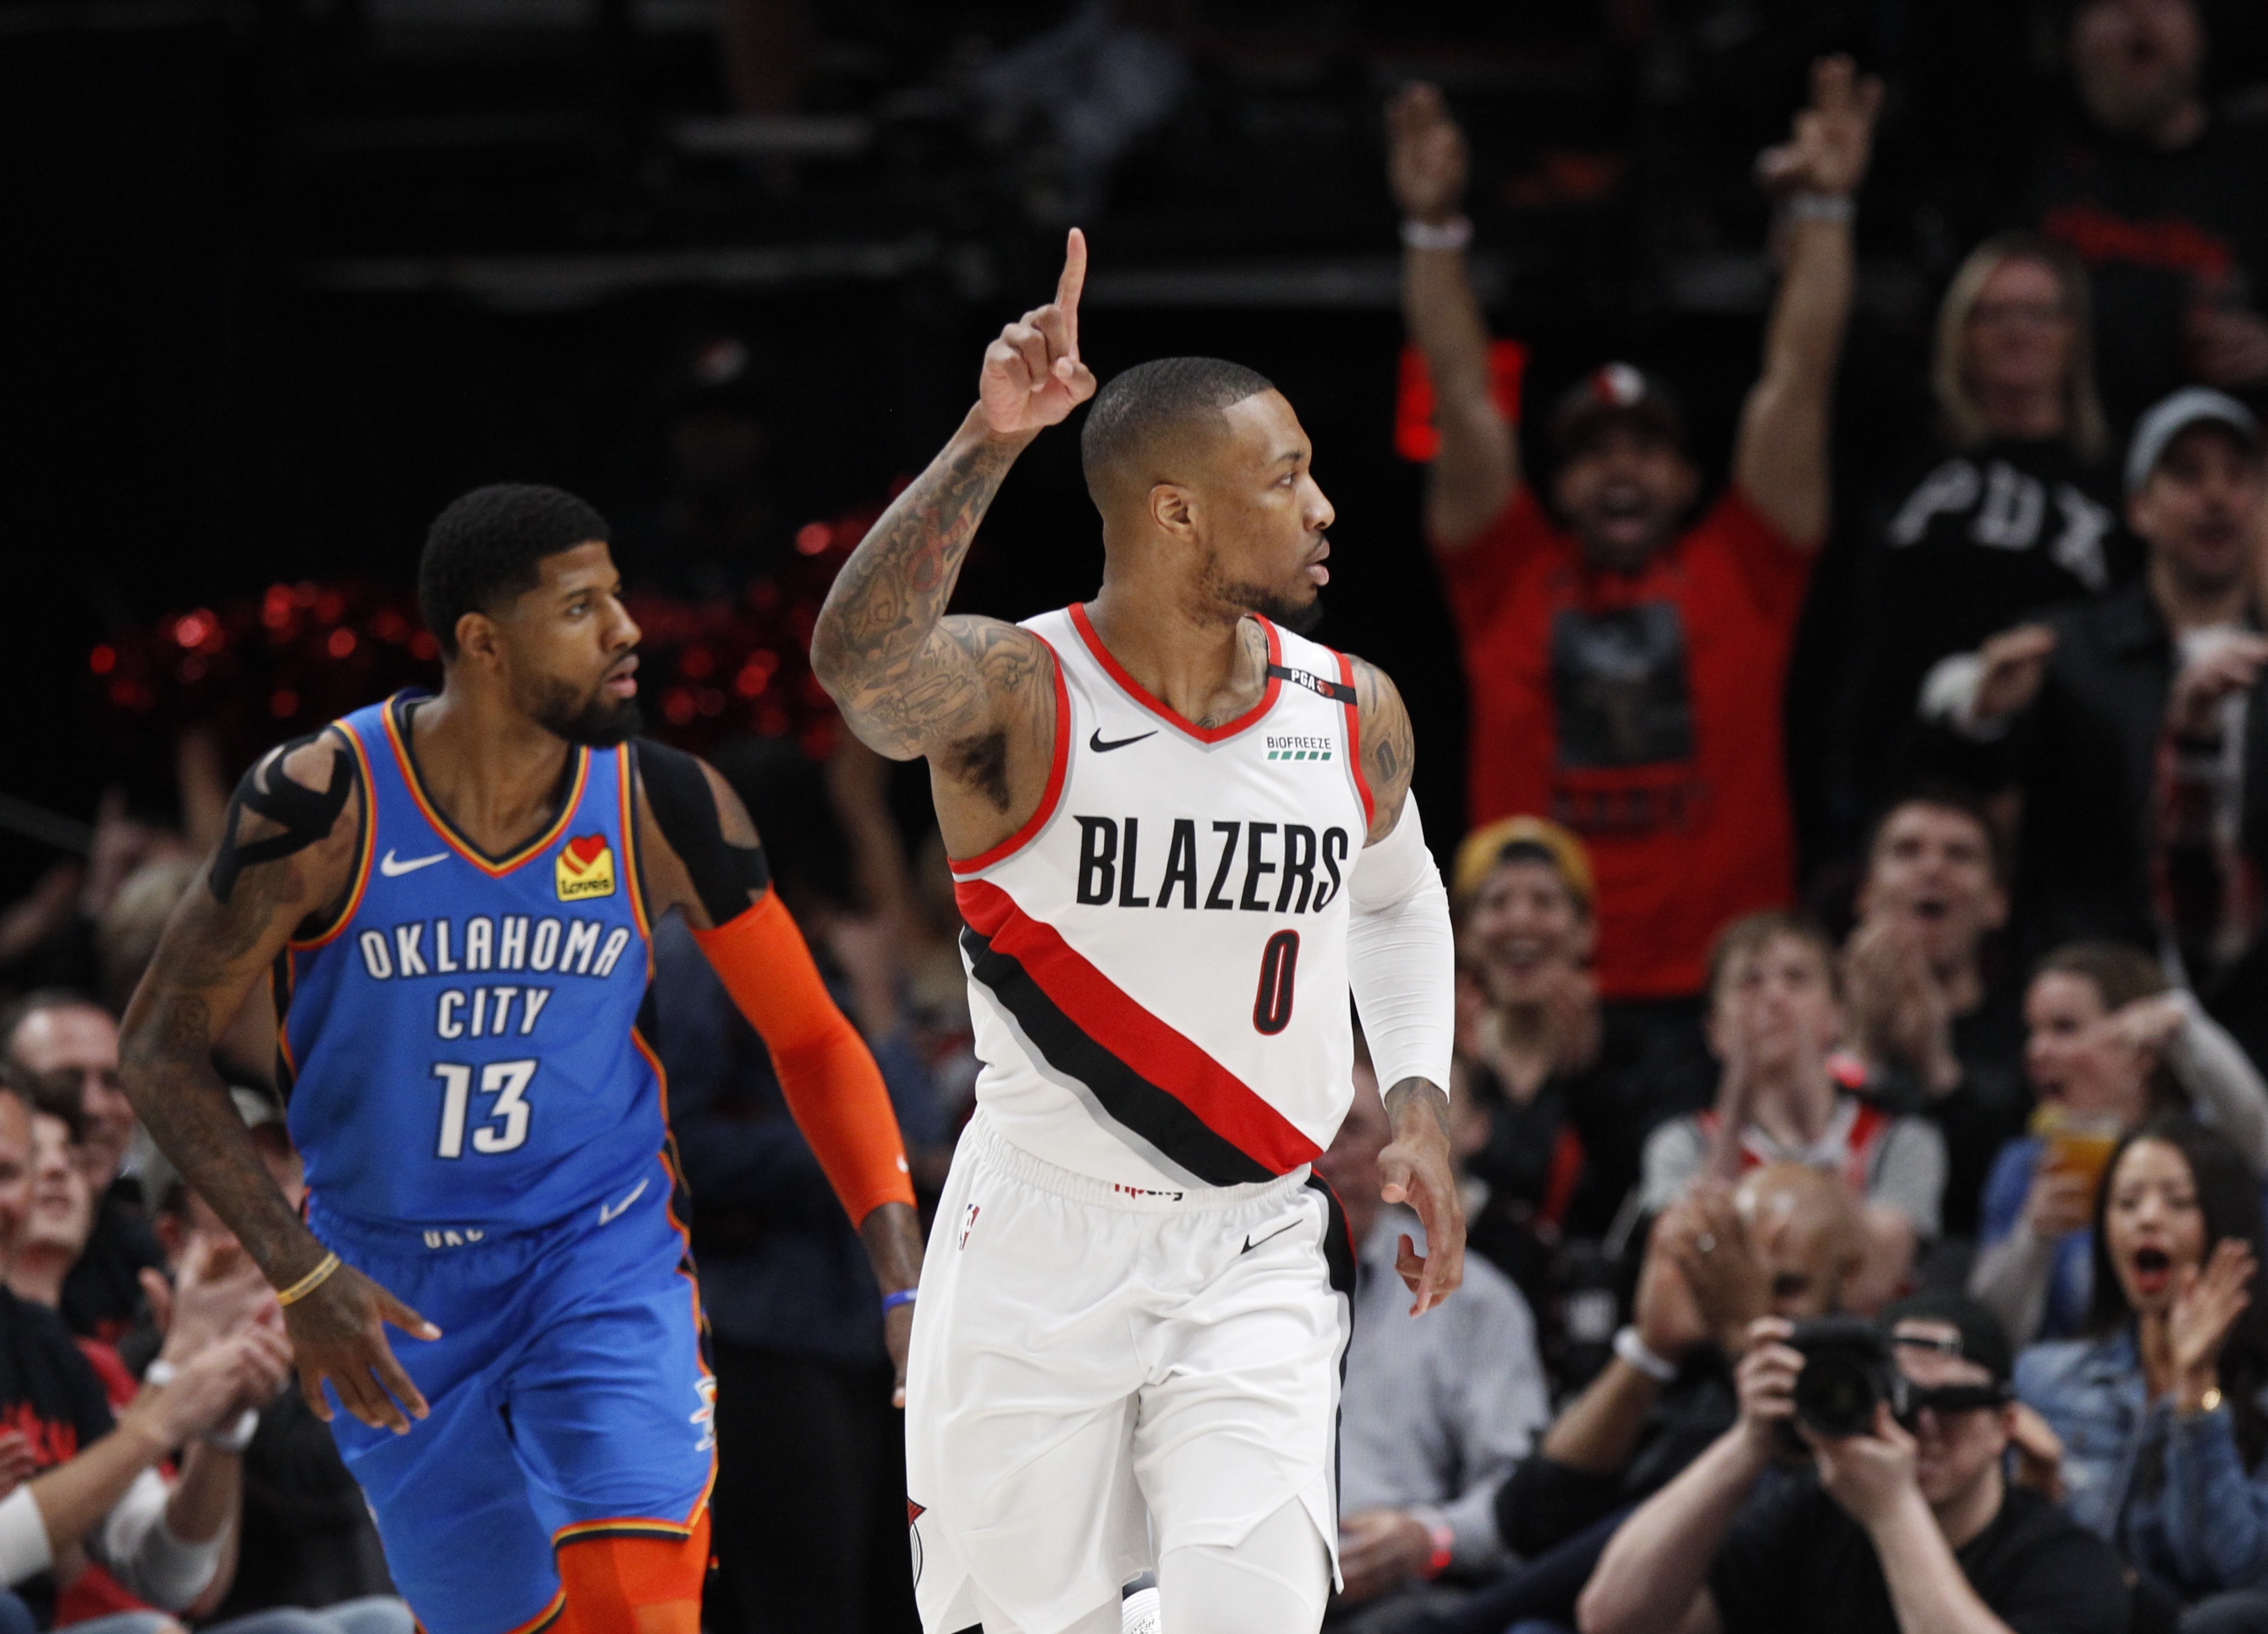 Portland wins Game 1 against the Thunder 104-99